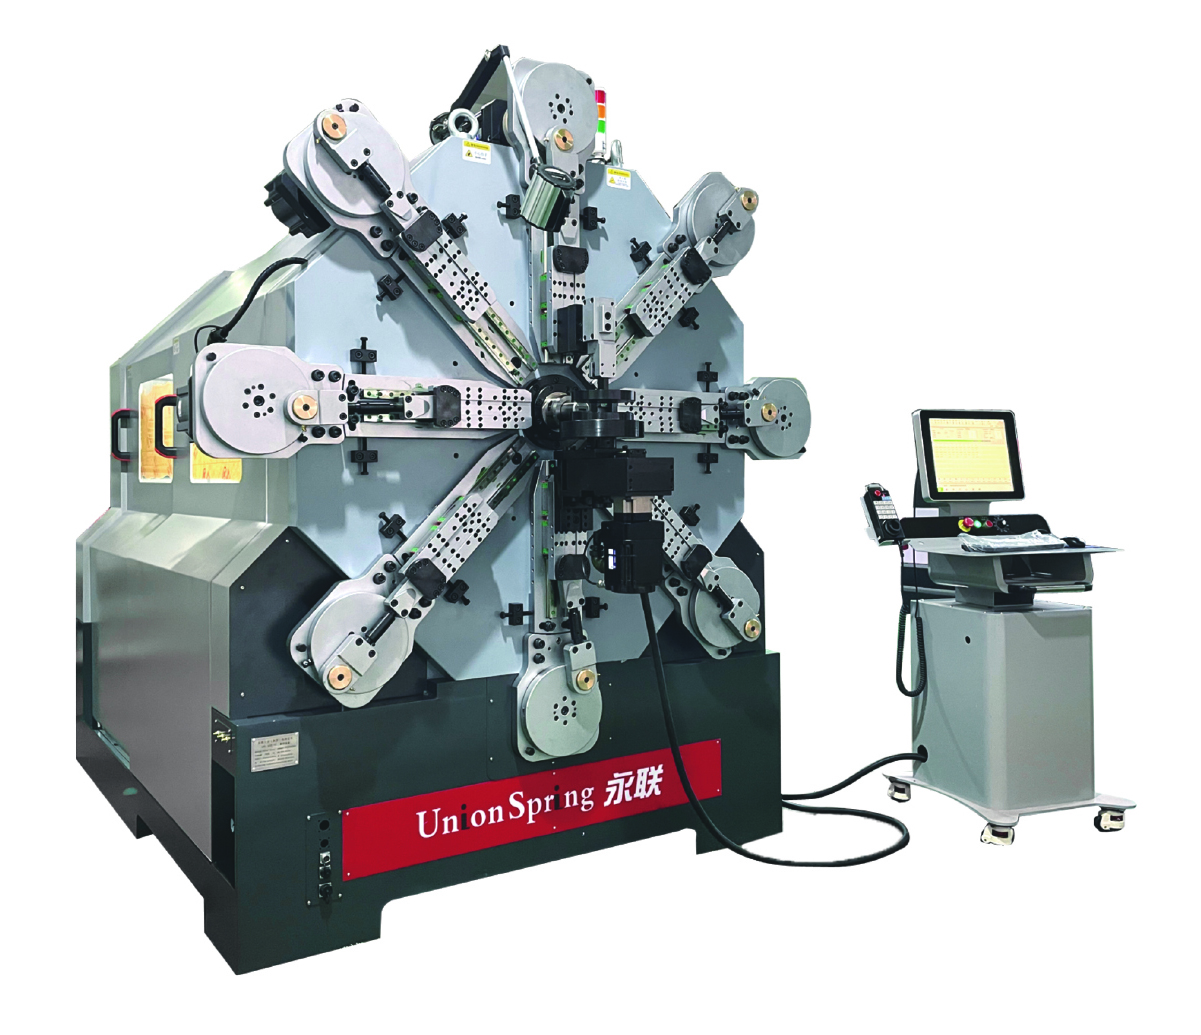 1260 CNC1260 CNC Camless Spring Machine for metal wire forming bending Camless Spring Machine for metal wire forming bending